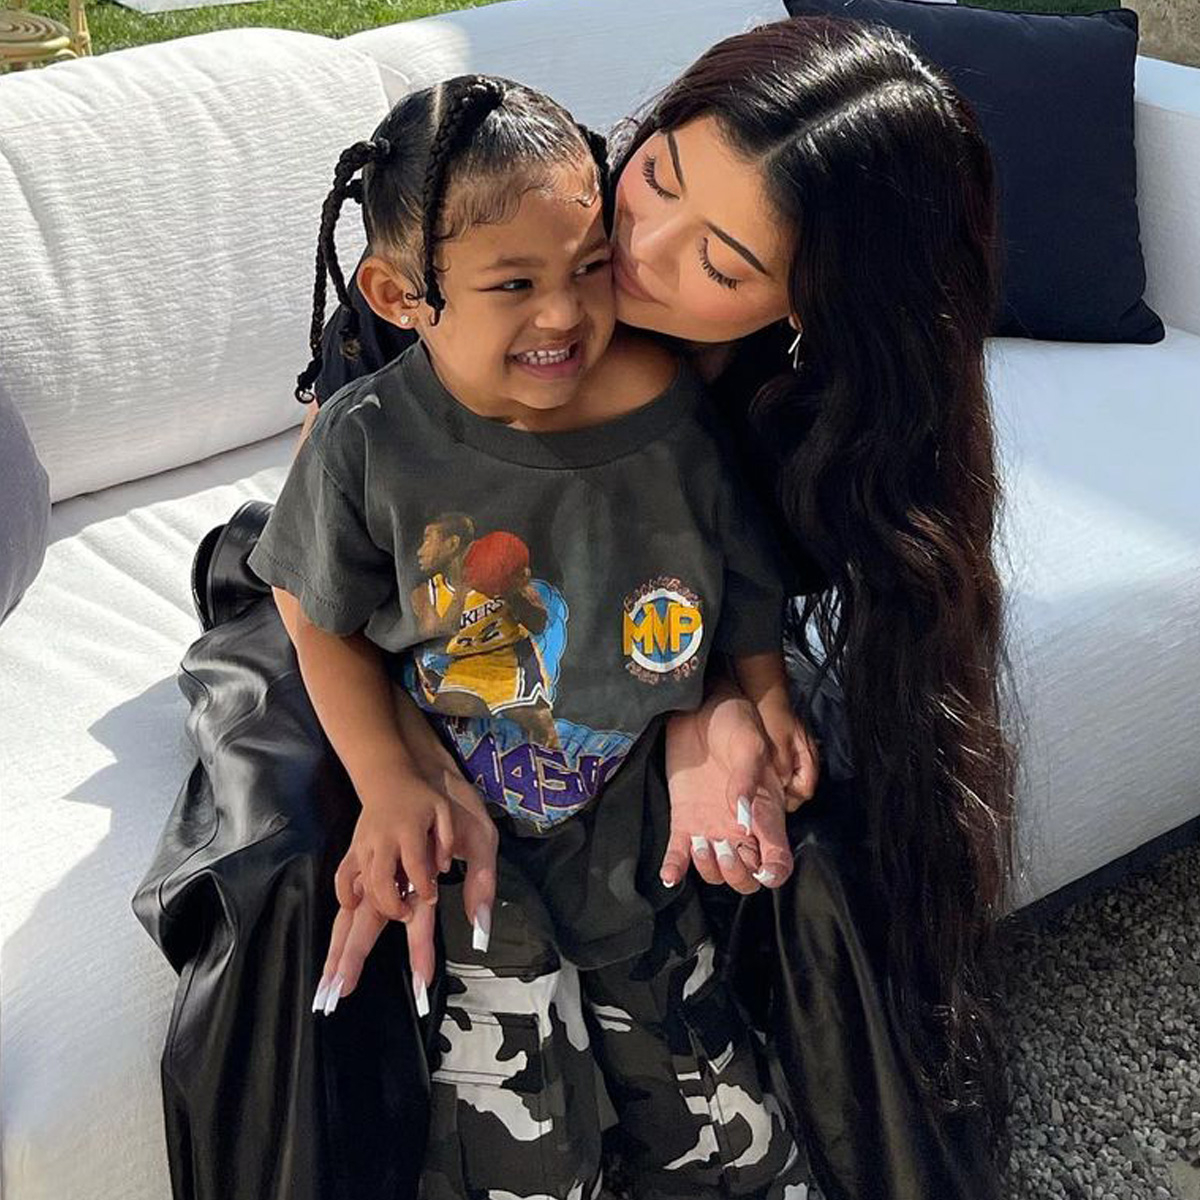 Kylie Jenner Reveals Stormi Doesn’t “Let Me” Do This Anymore